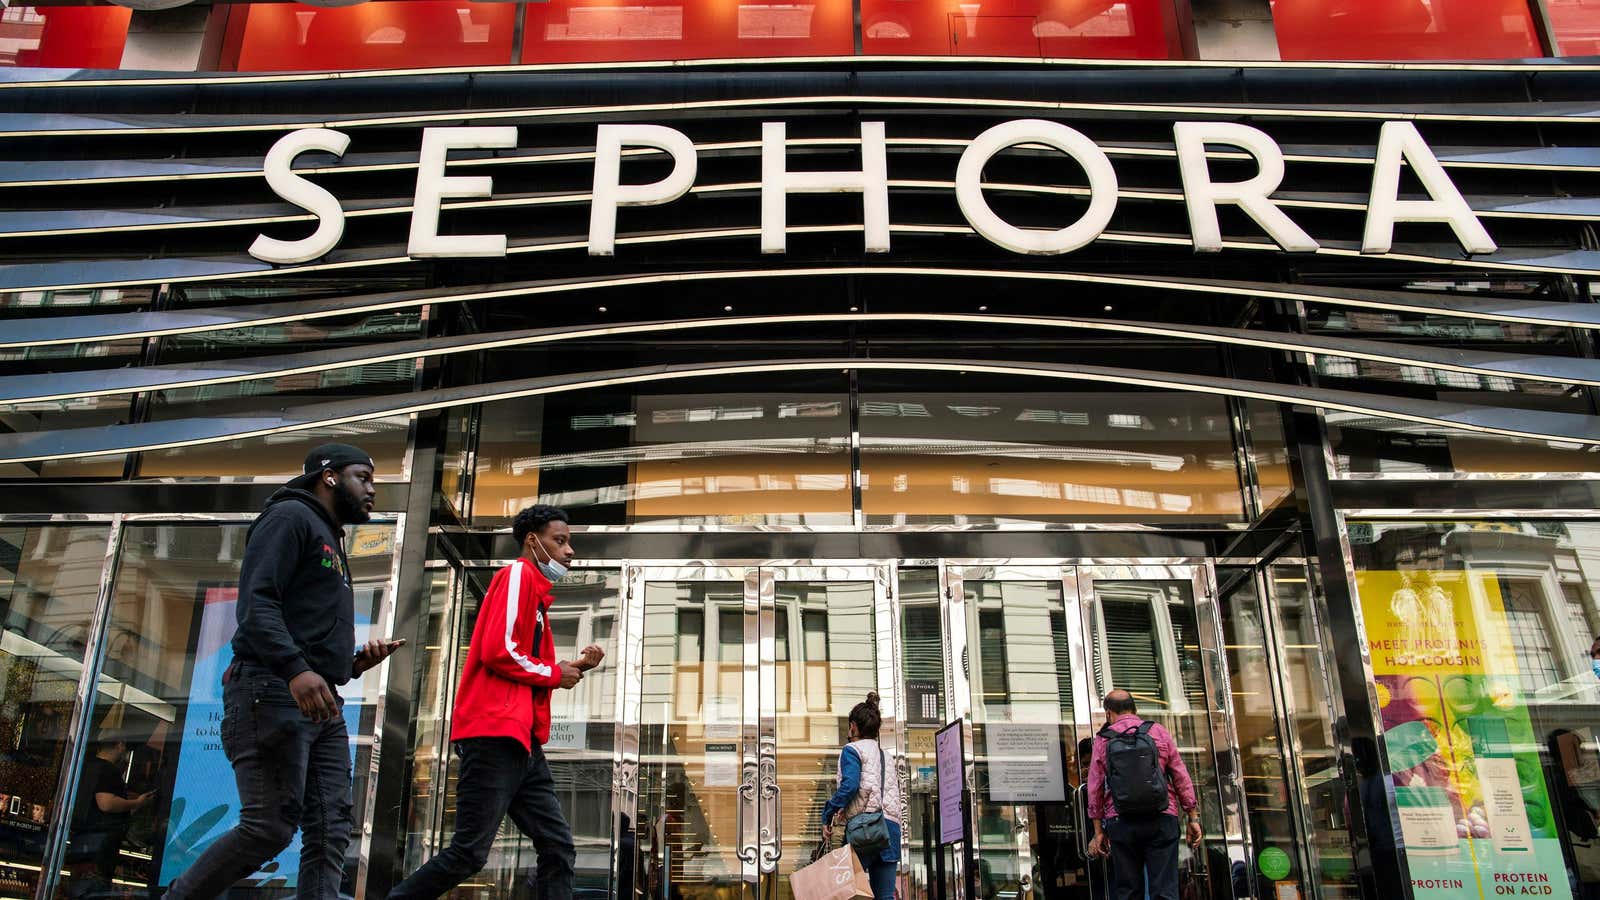 Sephora sees a bright future in shoppers buying its products directly through platforms like Instagram and TikTok.